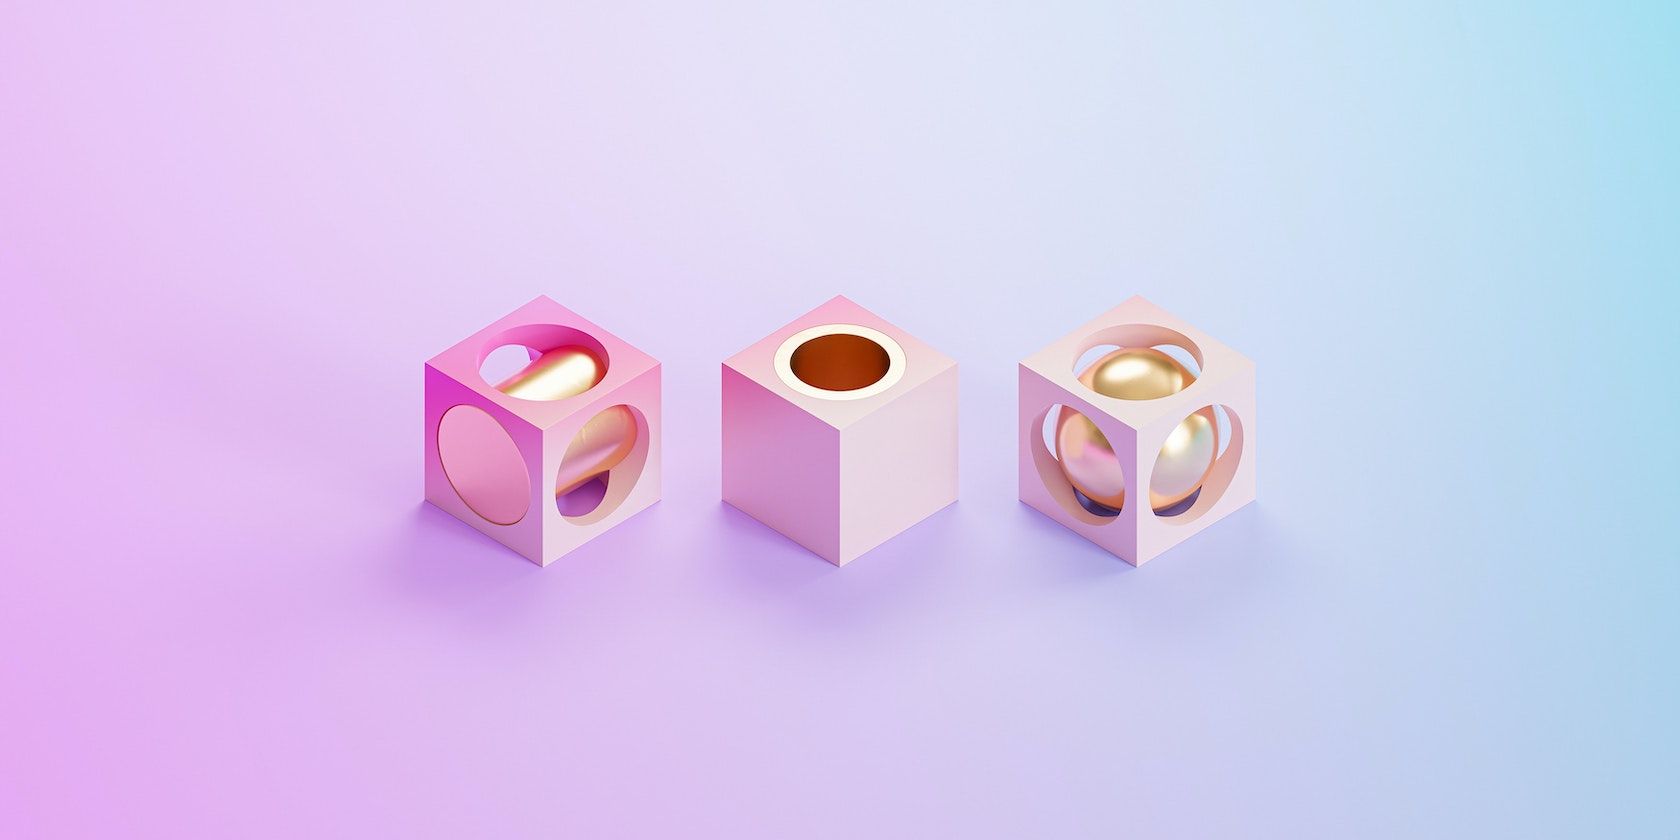 Three 3-dimensional printed cubes equally spaced on a pink and blue gradient background